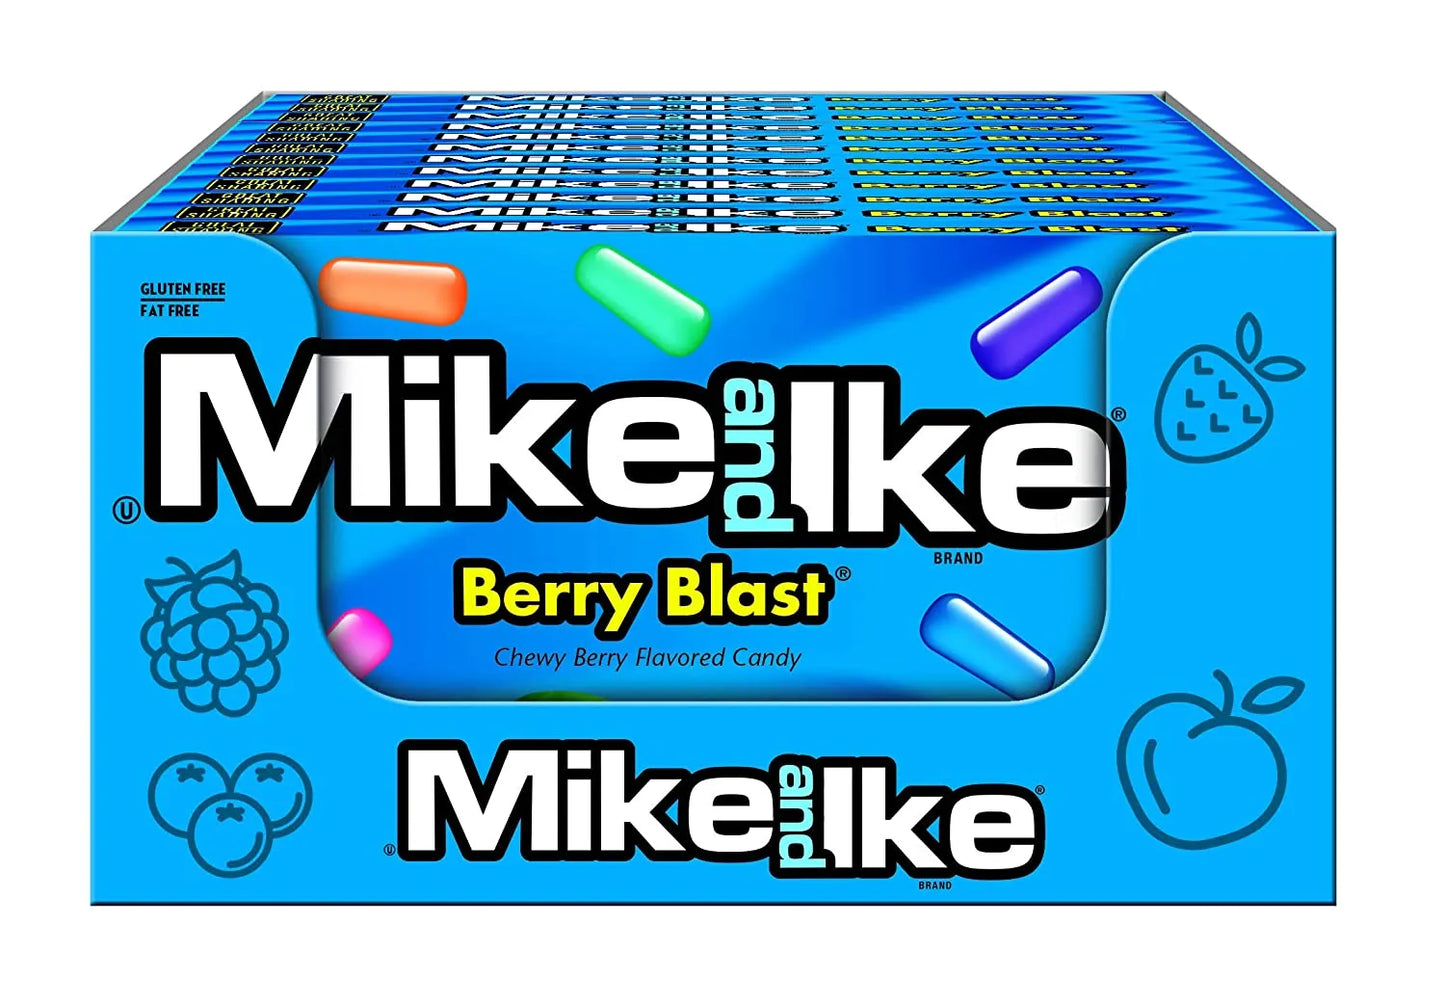 Mike&Ike Berry Blast Chewy Candy